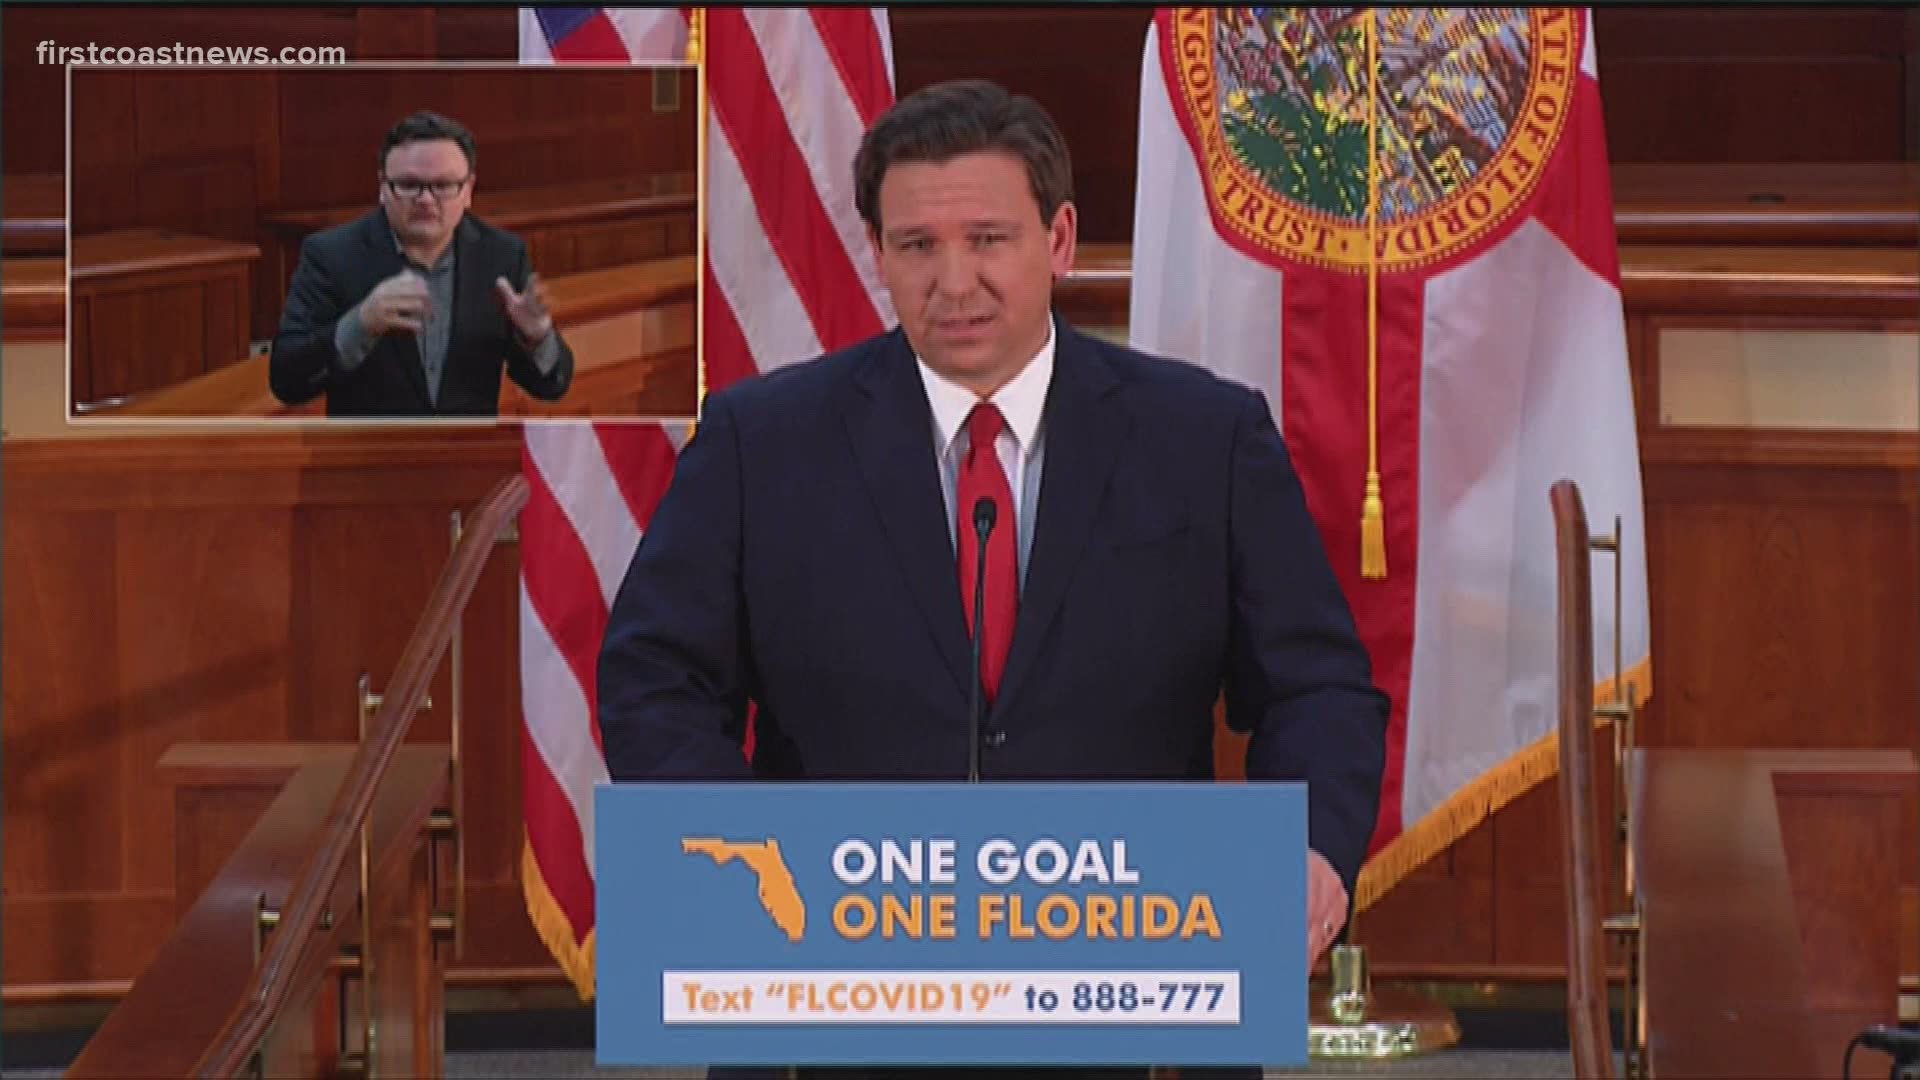 During the COVID-19 update, DeSantis addressed the backlog of test results from Miami from testing done back in June.